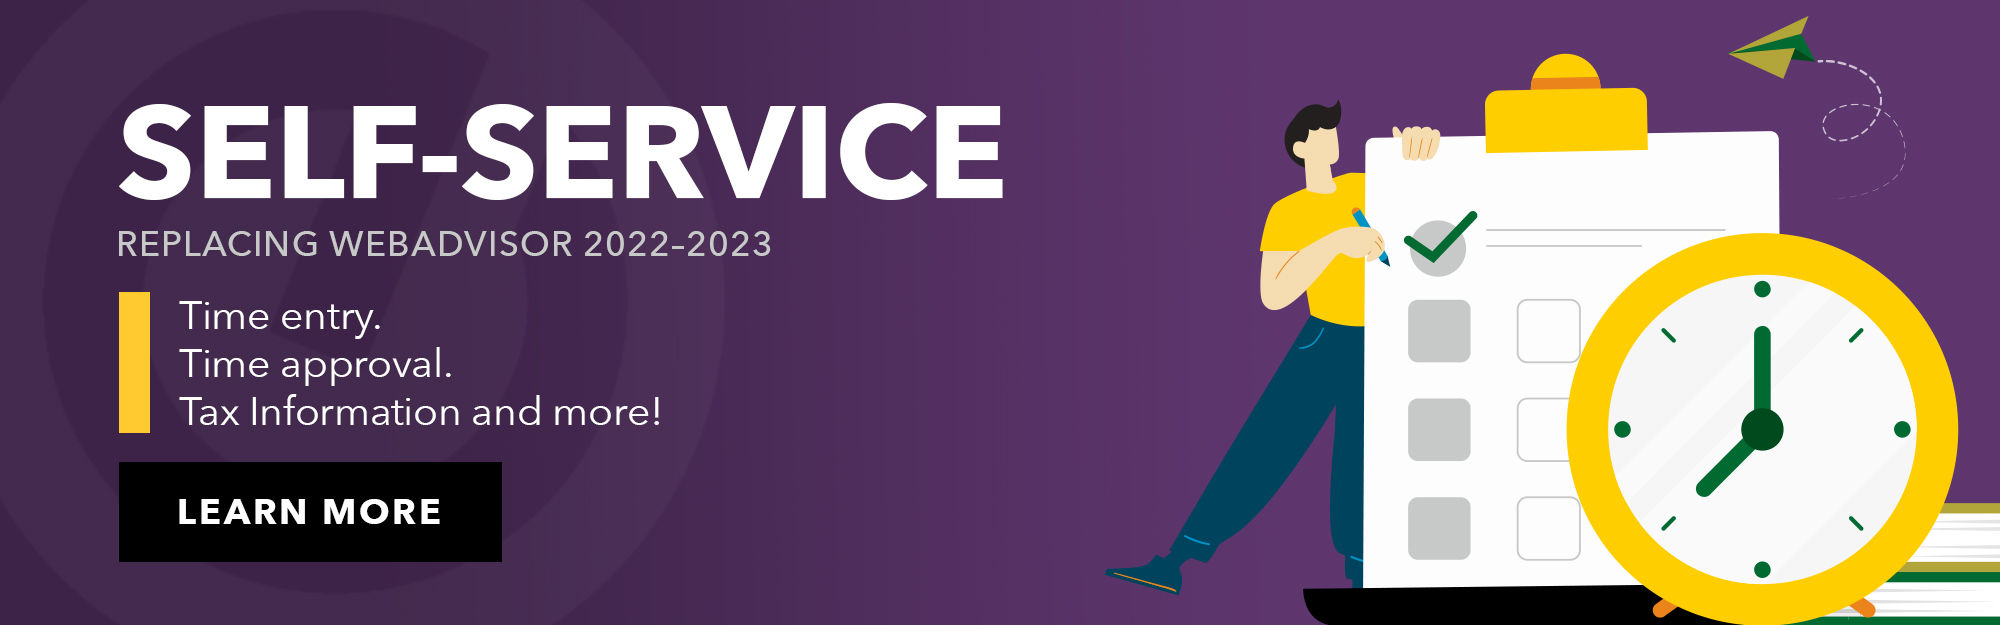 Self service is replacing Web Advisor throughout 2022. Click to learn more!